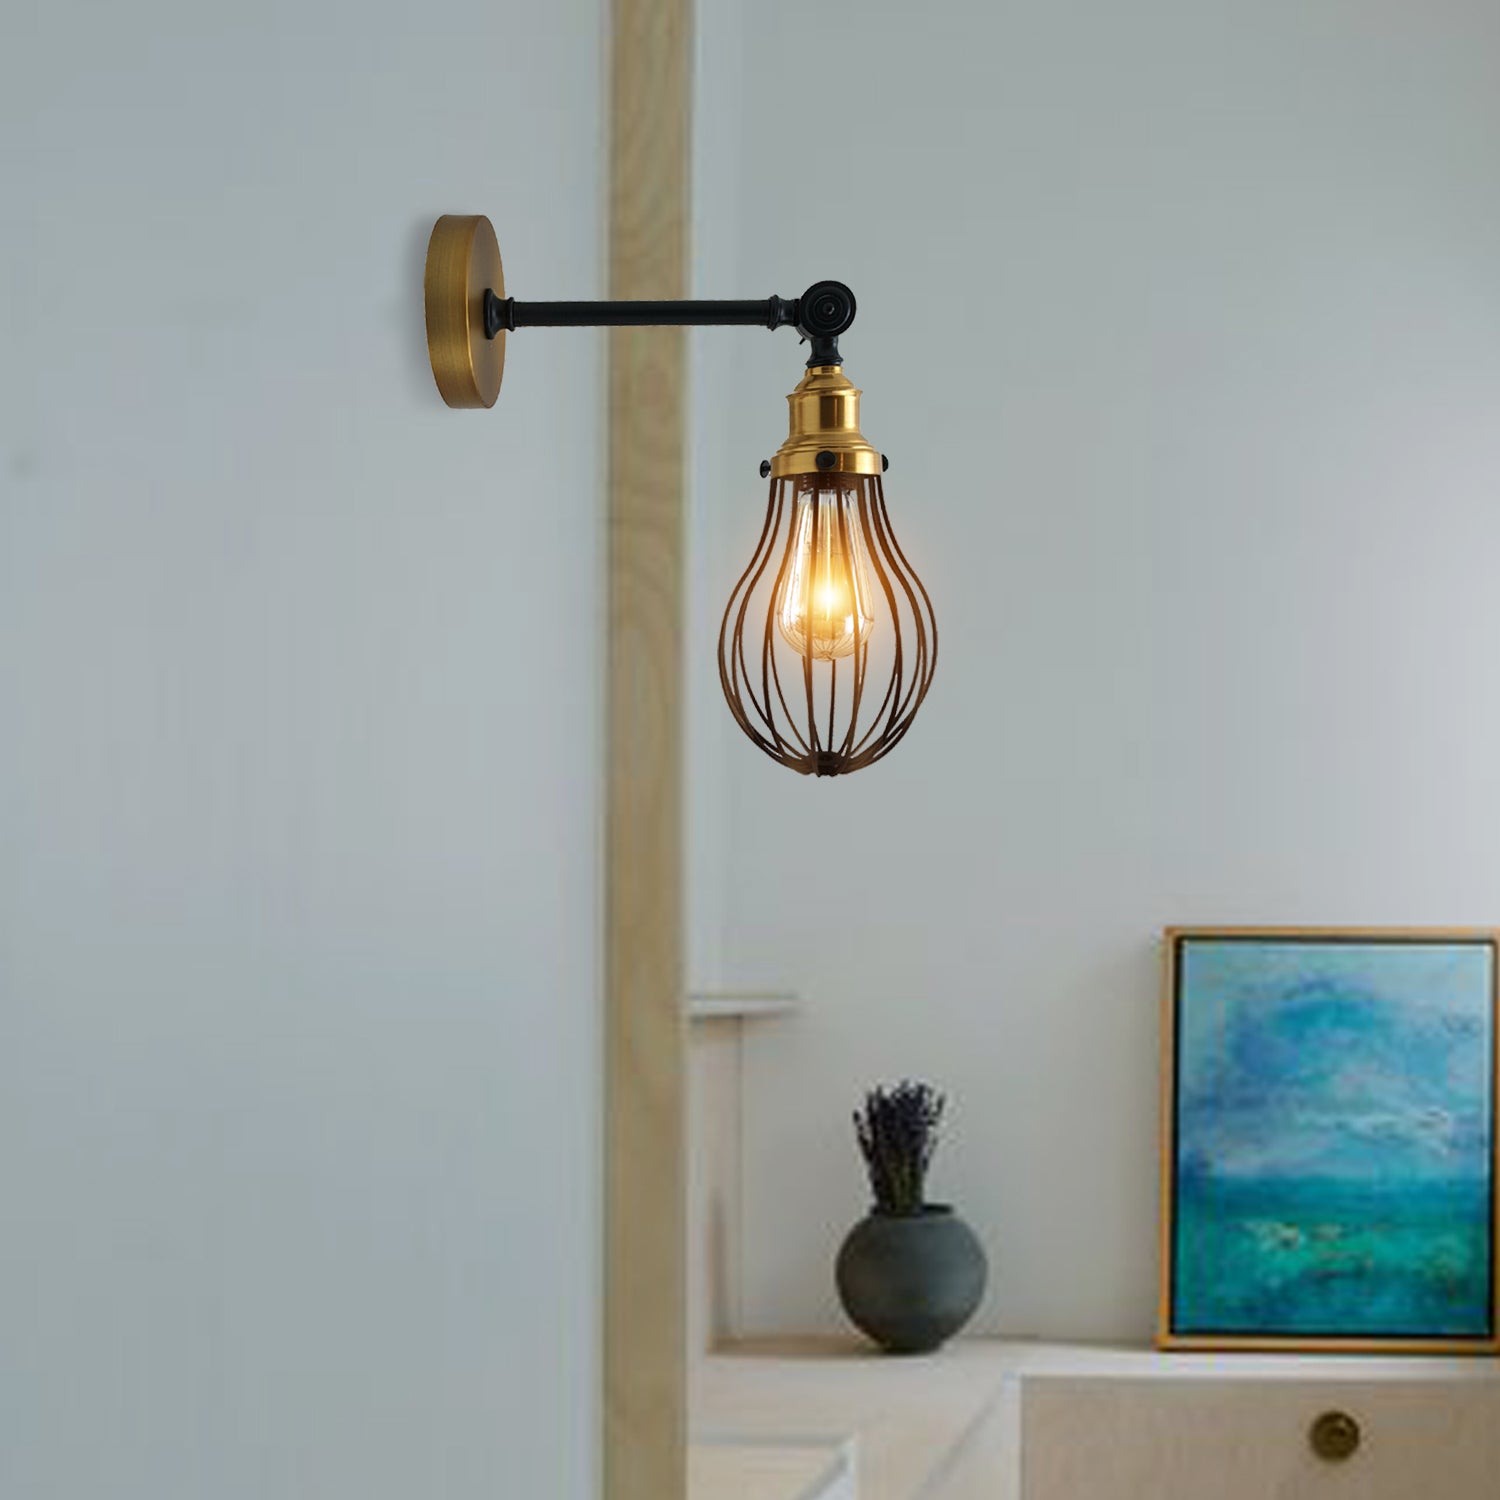 Vintage Industrial Retro Brushed Copper Metal indoor Wall Lamp Light Cage-Application image